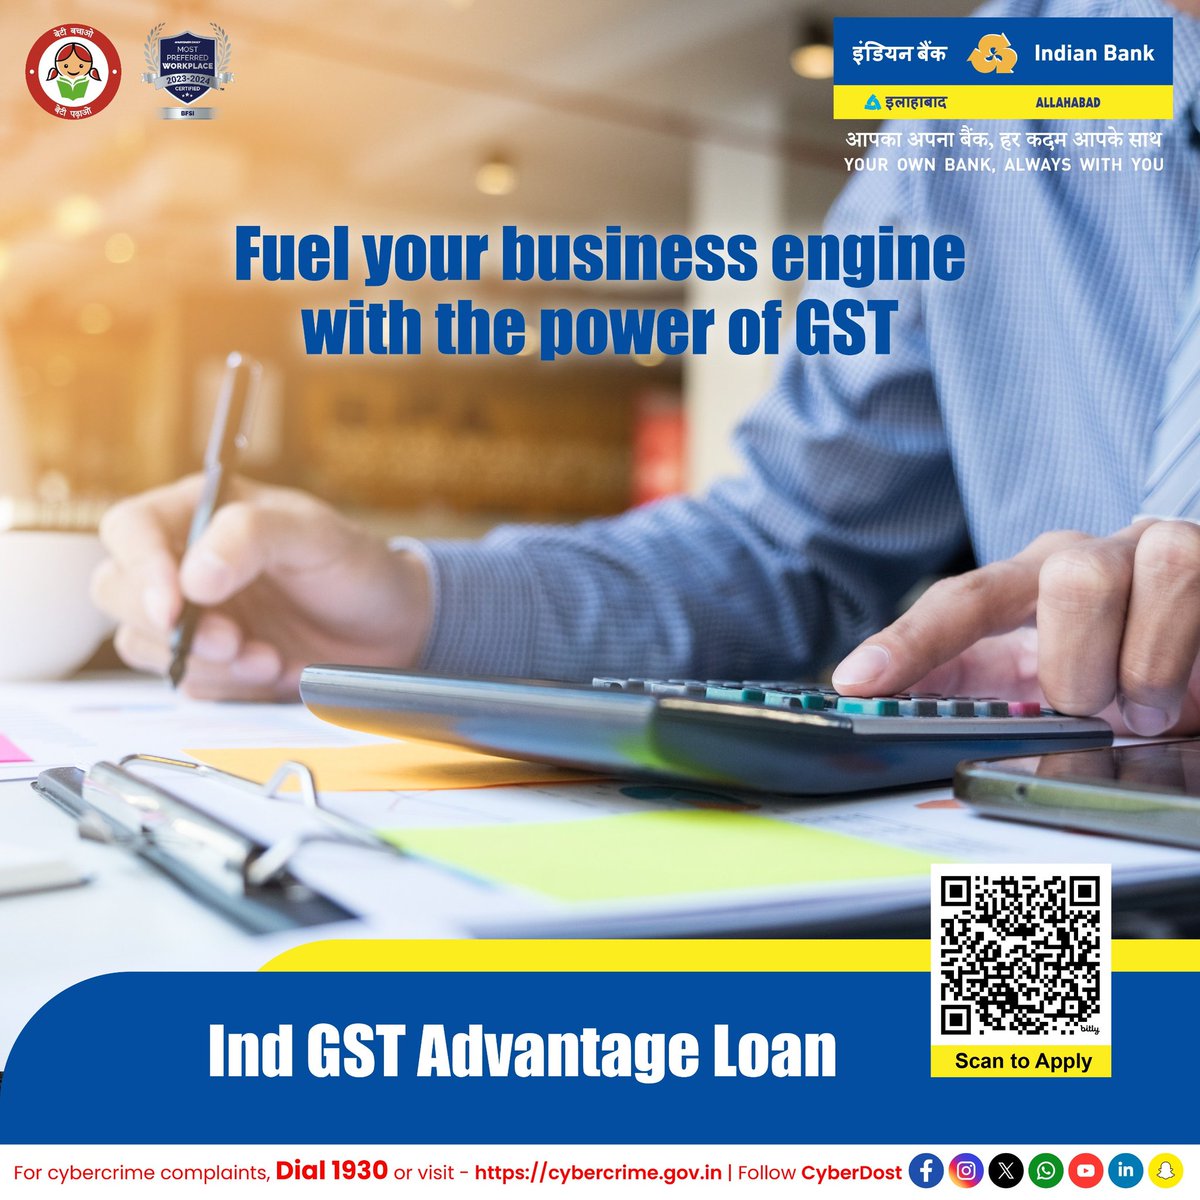 Are you a GST-registered business owner? We have an exclusive loan designed to fuel your ambitions! Introducing Ind GST Advantage Loan scheme - the perfect solution to keep your business thriving with a constant flow of funds. Apply now: bit.ly/IB_IndGSTAdvan… #IndianBank